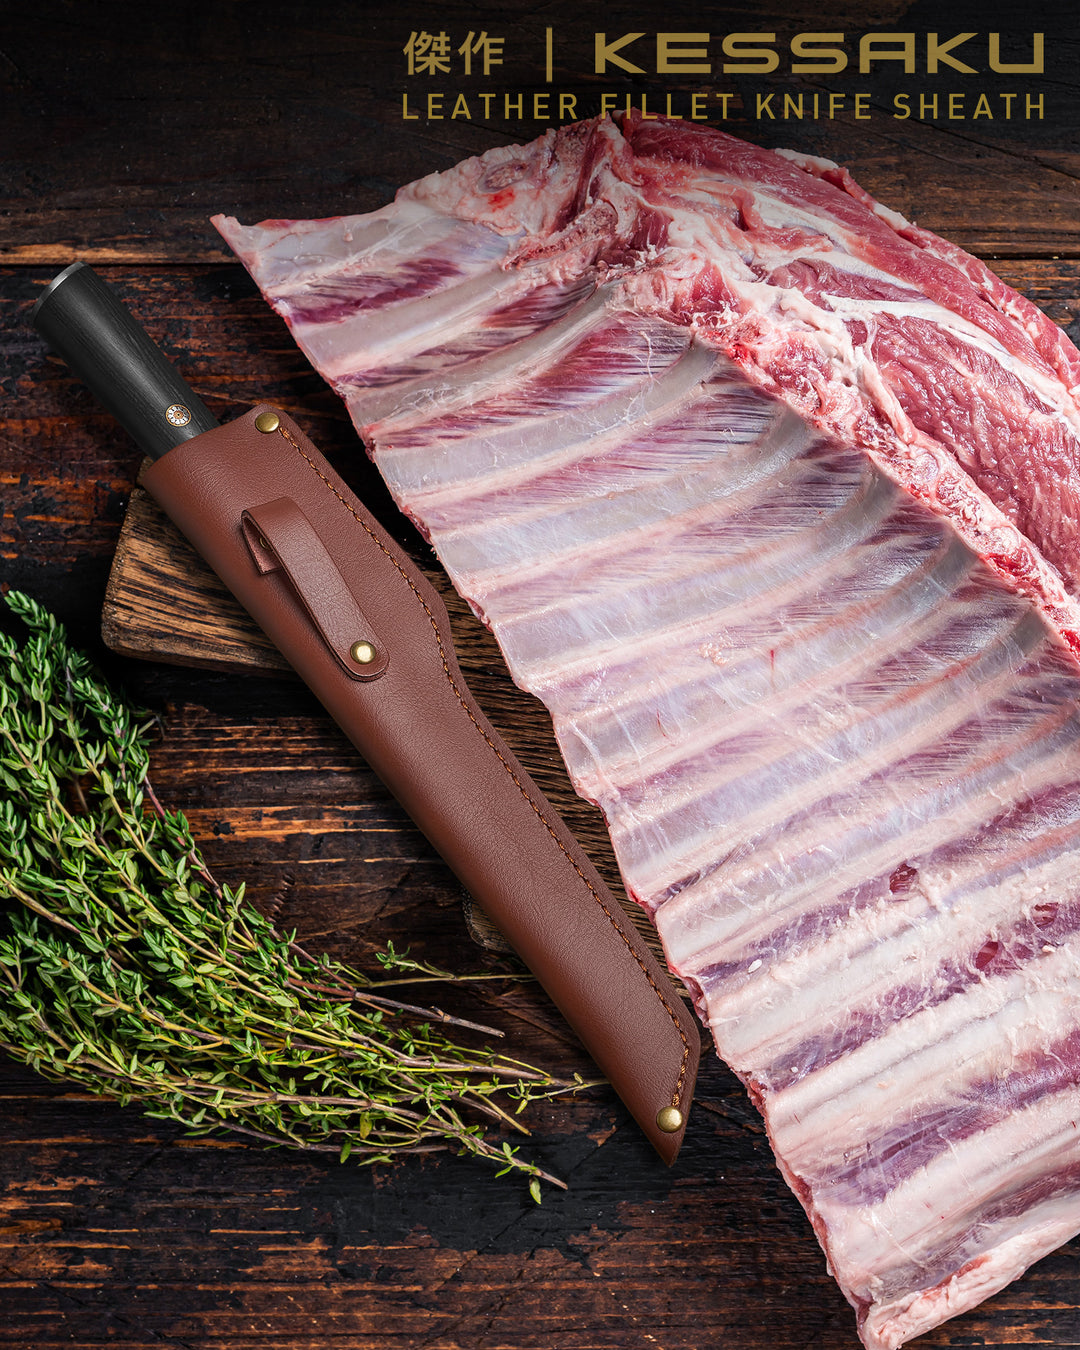 The Spectre Boning Knife seated in the Kessaku Leather Knife Sheath next to a large rack of ribs.